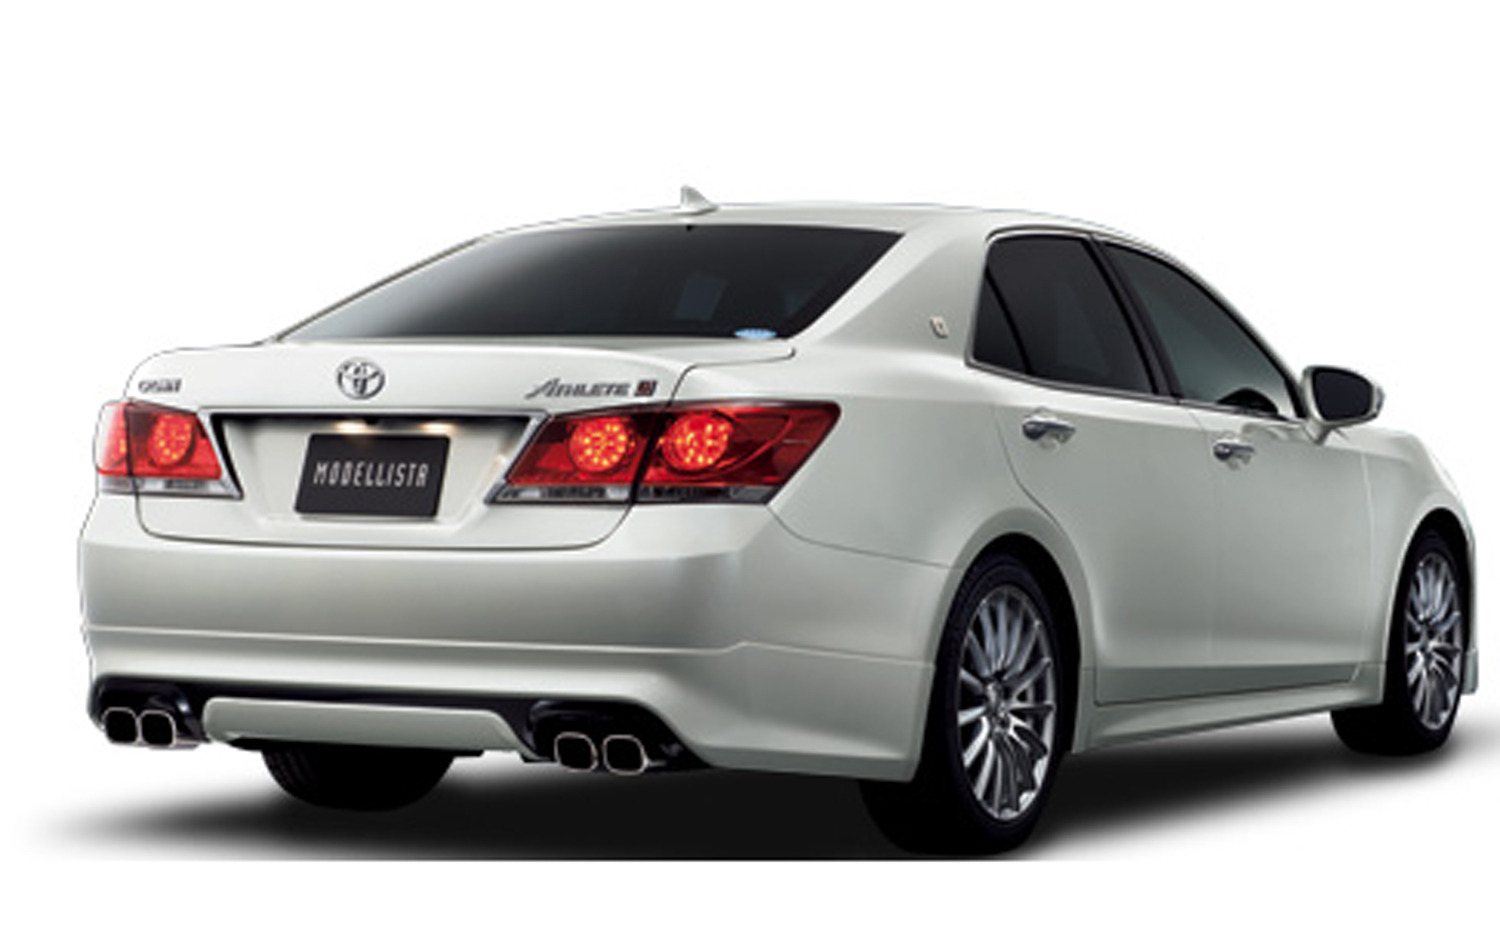 Toyota Crown Backgrounds, Compatible - PC, Mobile, Gadgets| 1500x938 px